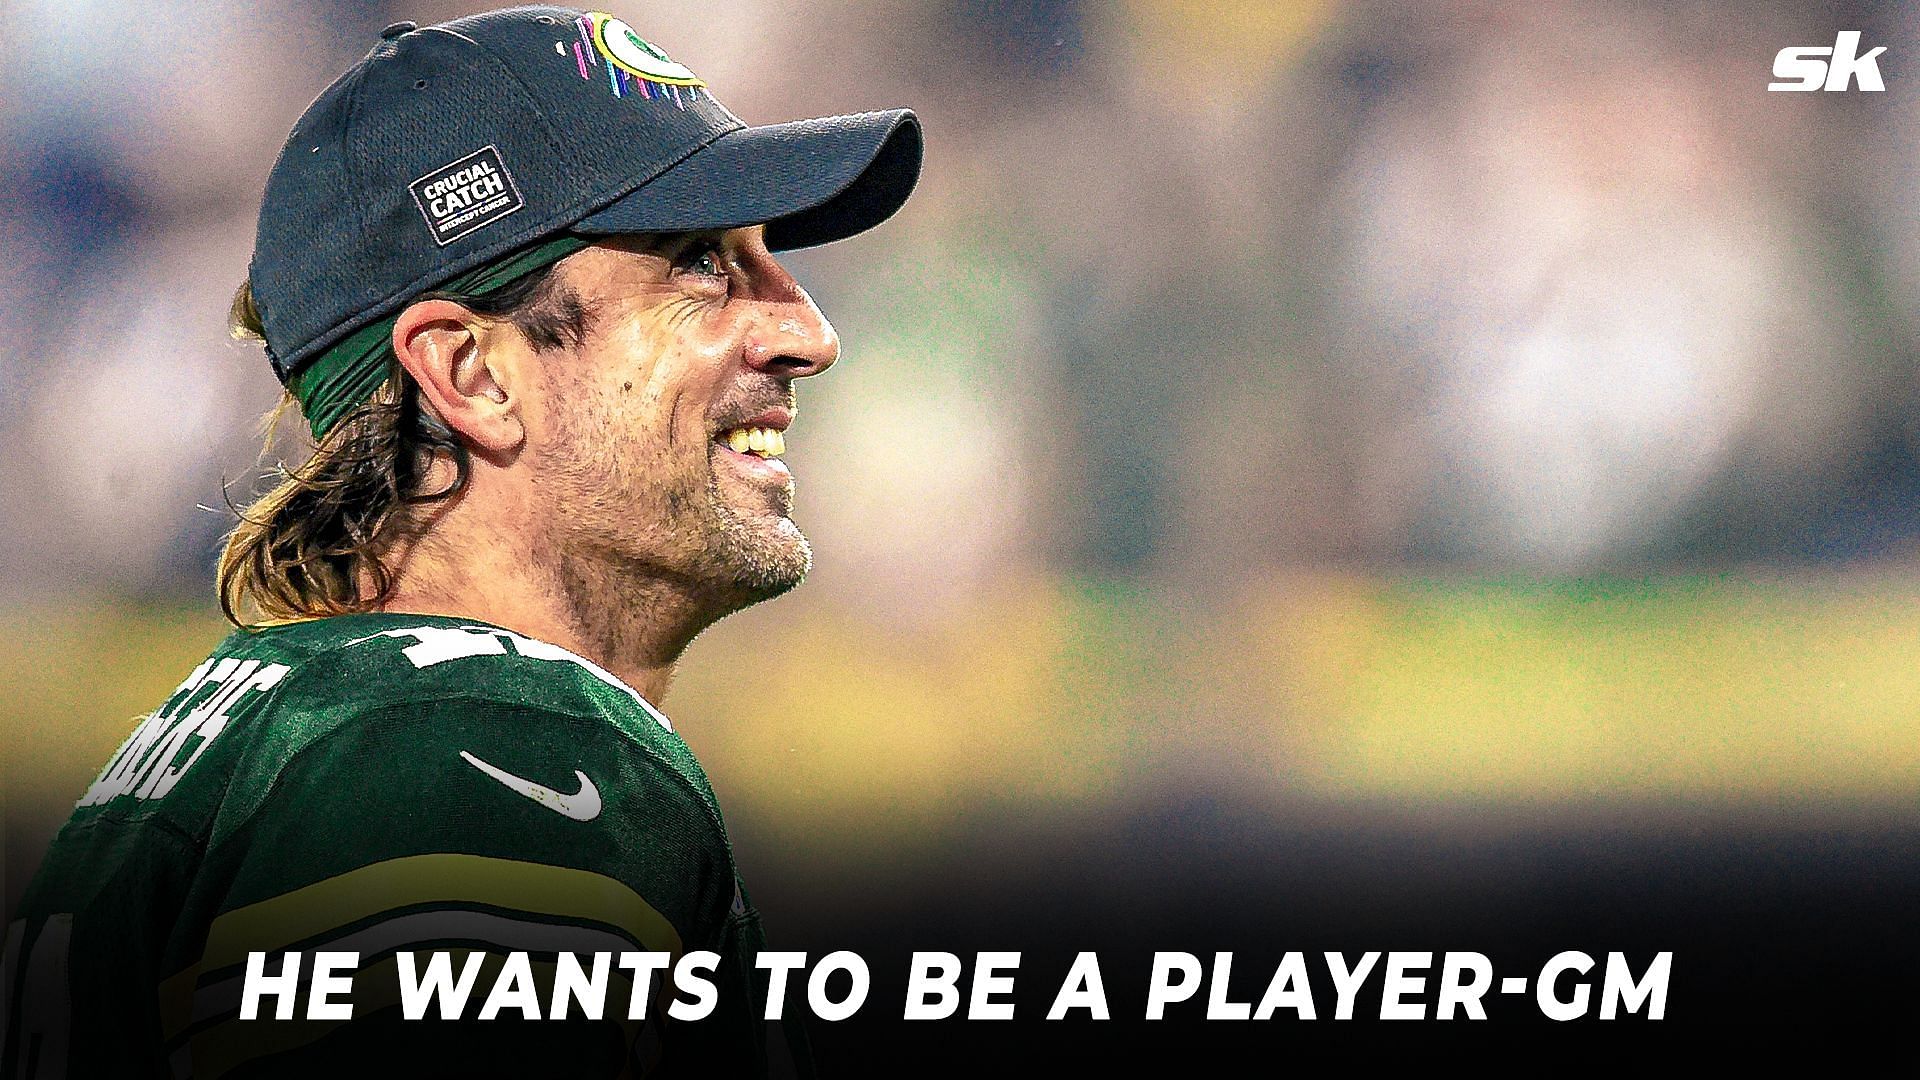 According to Robert Griffin III, Aaron Rodgers wants to be a player-general manager